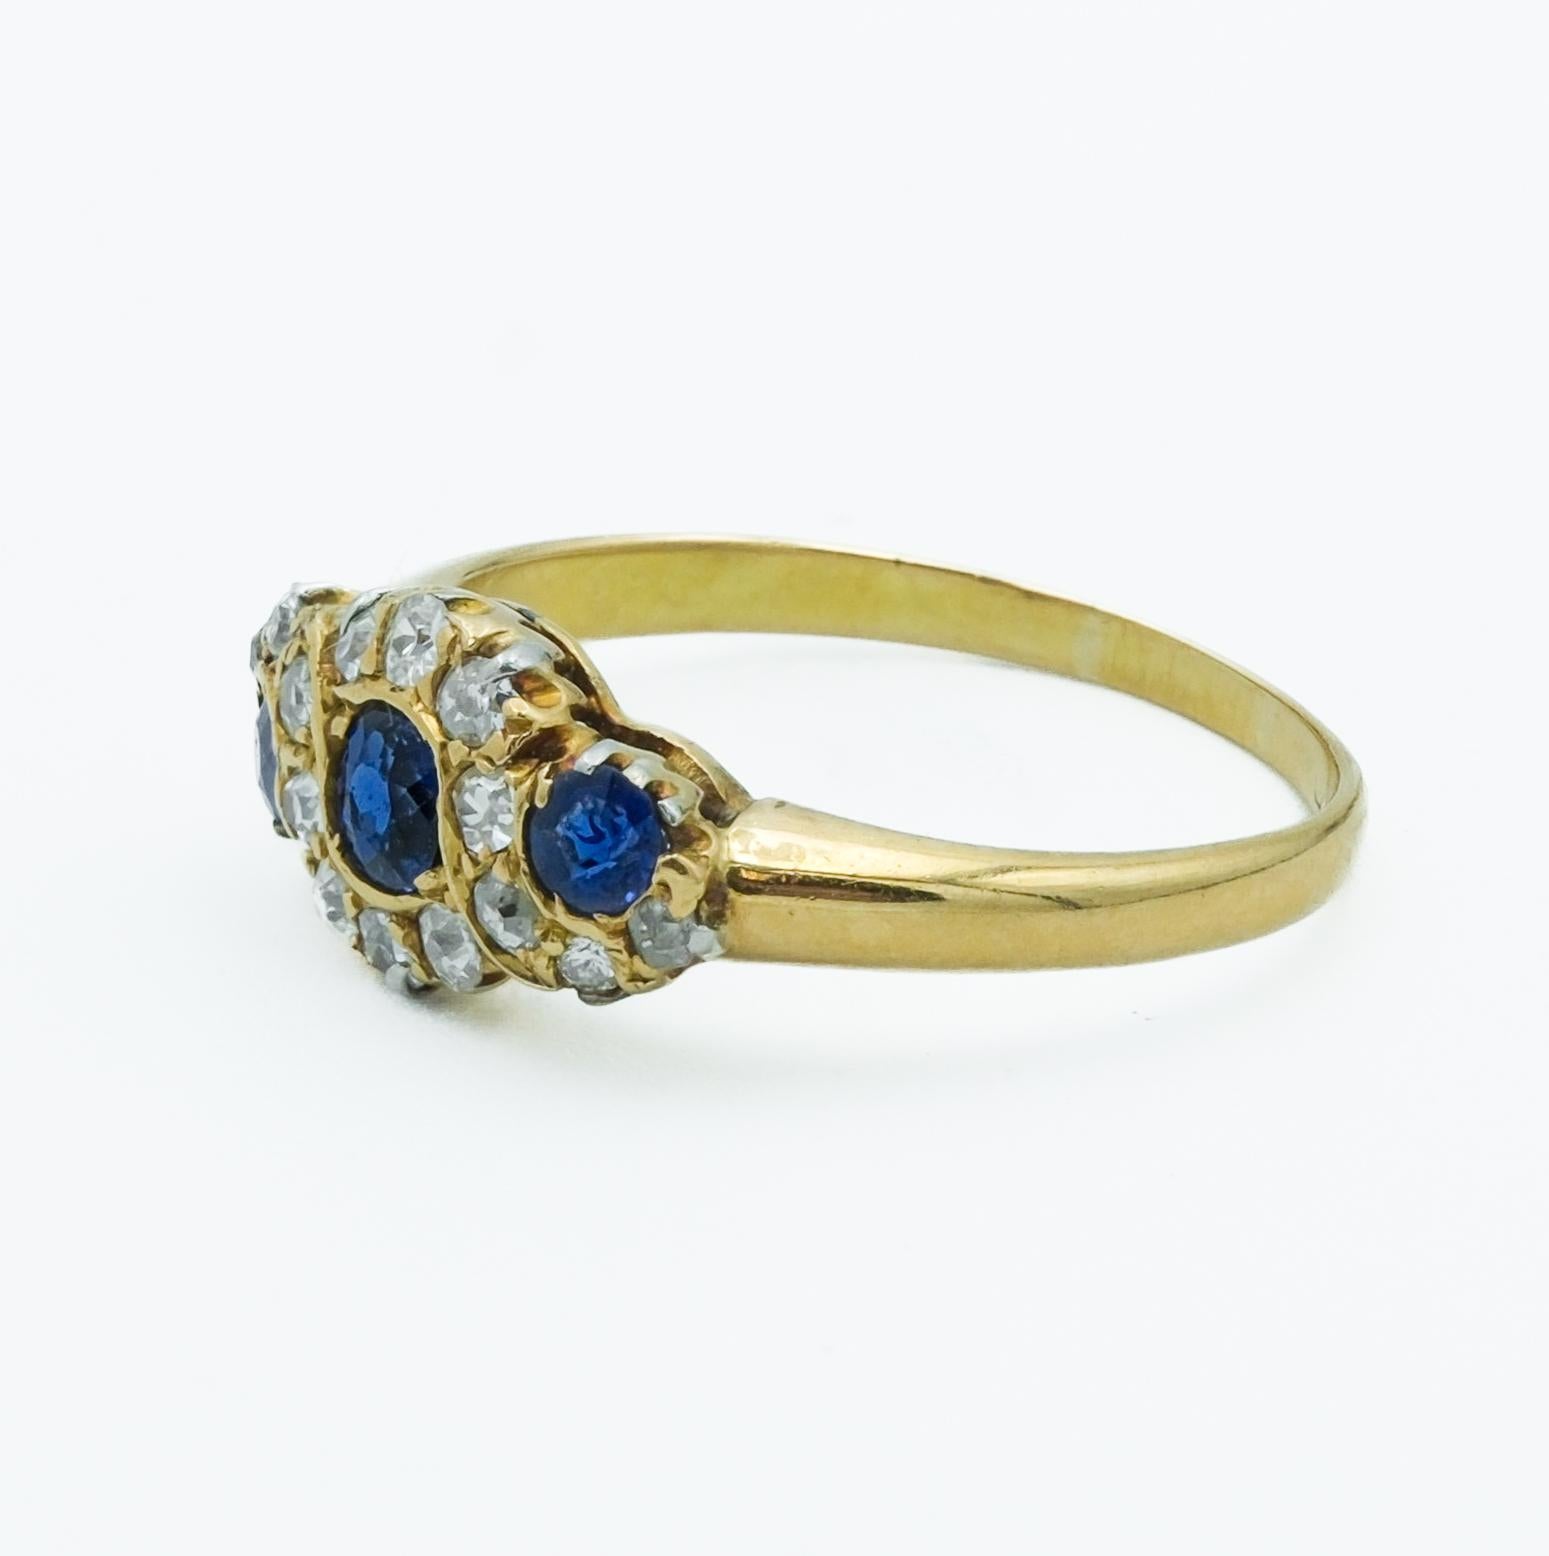 This Victorian-era ring, crafted around the 1880s, is an exquisite example of the period's intricate and opulent designs. The ring features a central royal blue sapphire flanked by two smaller sapphires, each set within a halo of diamonds. The deep